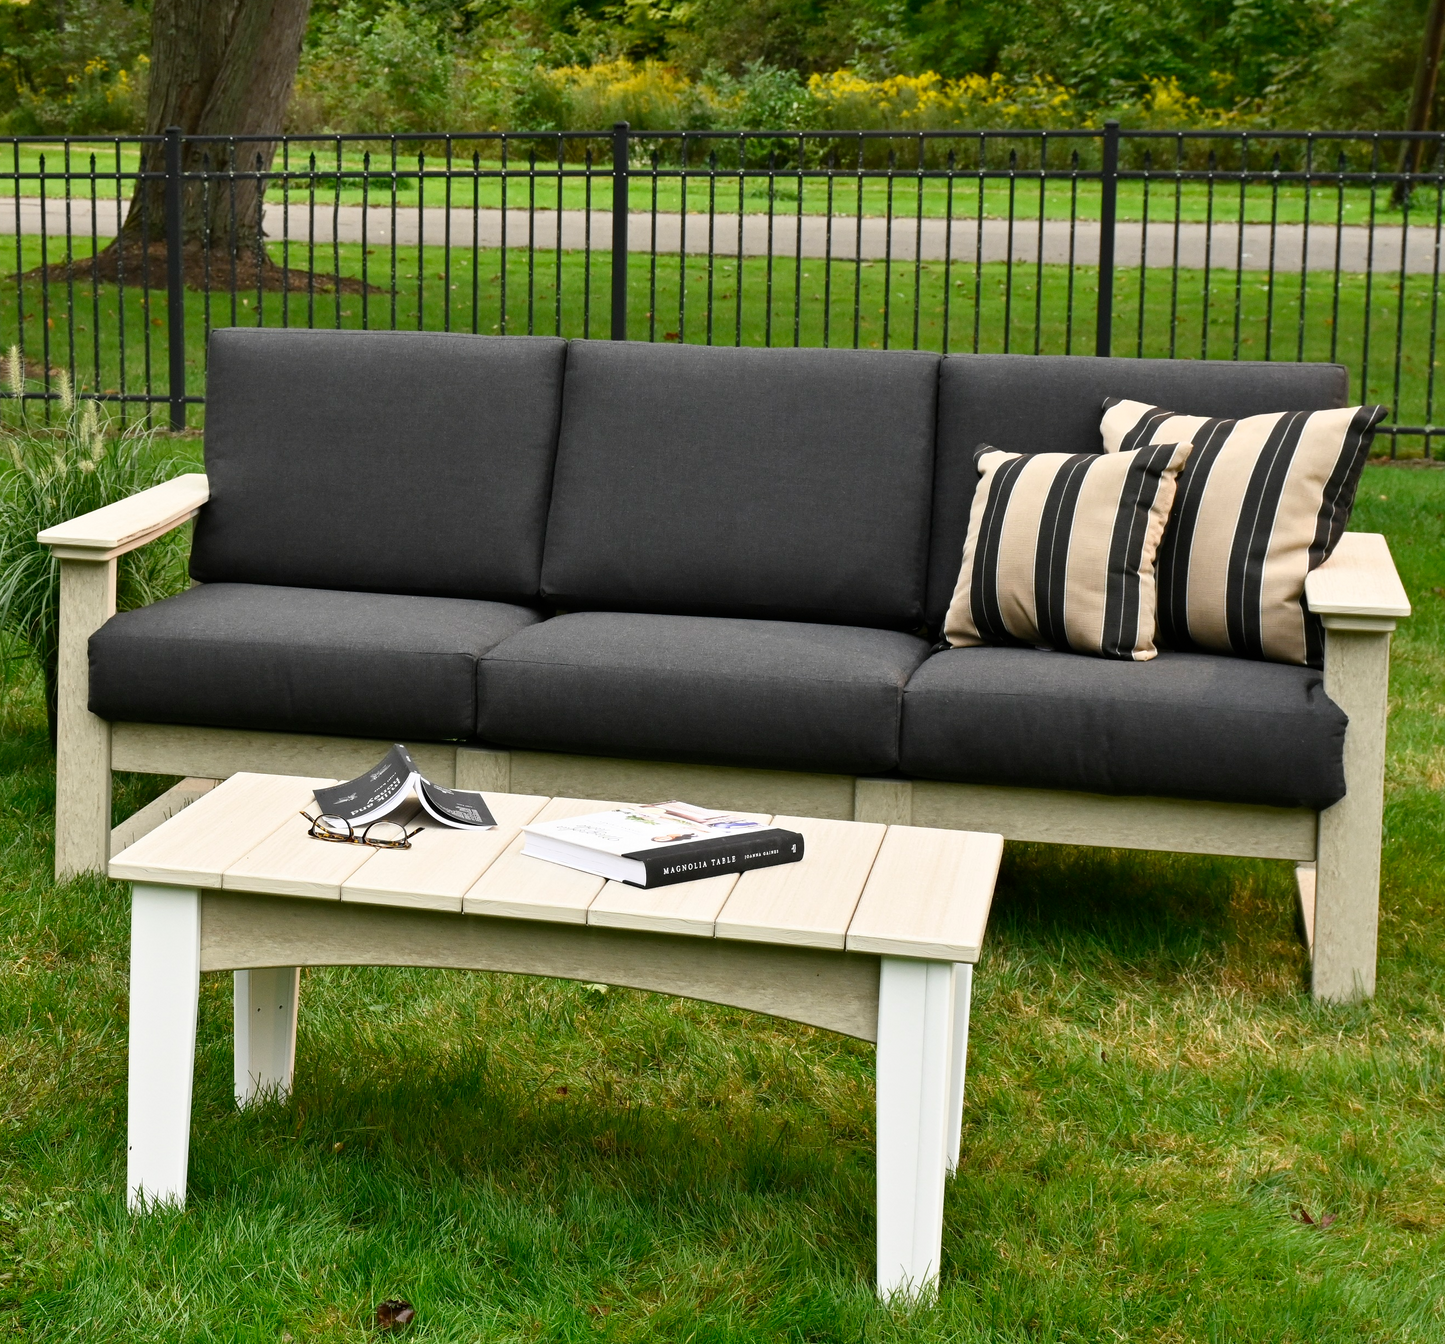 LuxCraft Recycled Plastic Lanai Deep Seating Sofa - LEAD TIME TO SHIP 3 TO 4 WEEKS